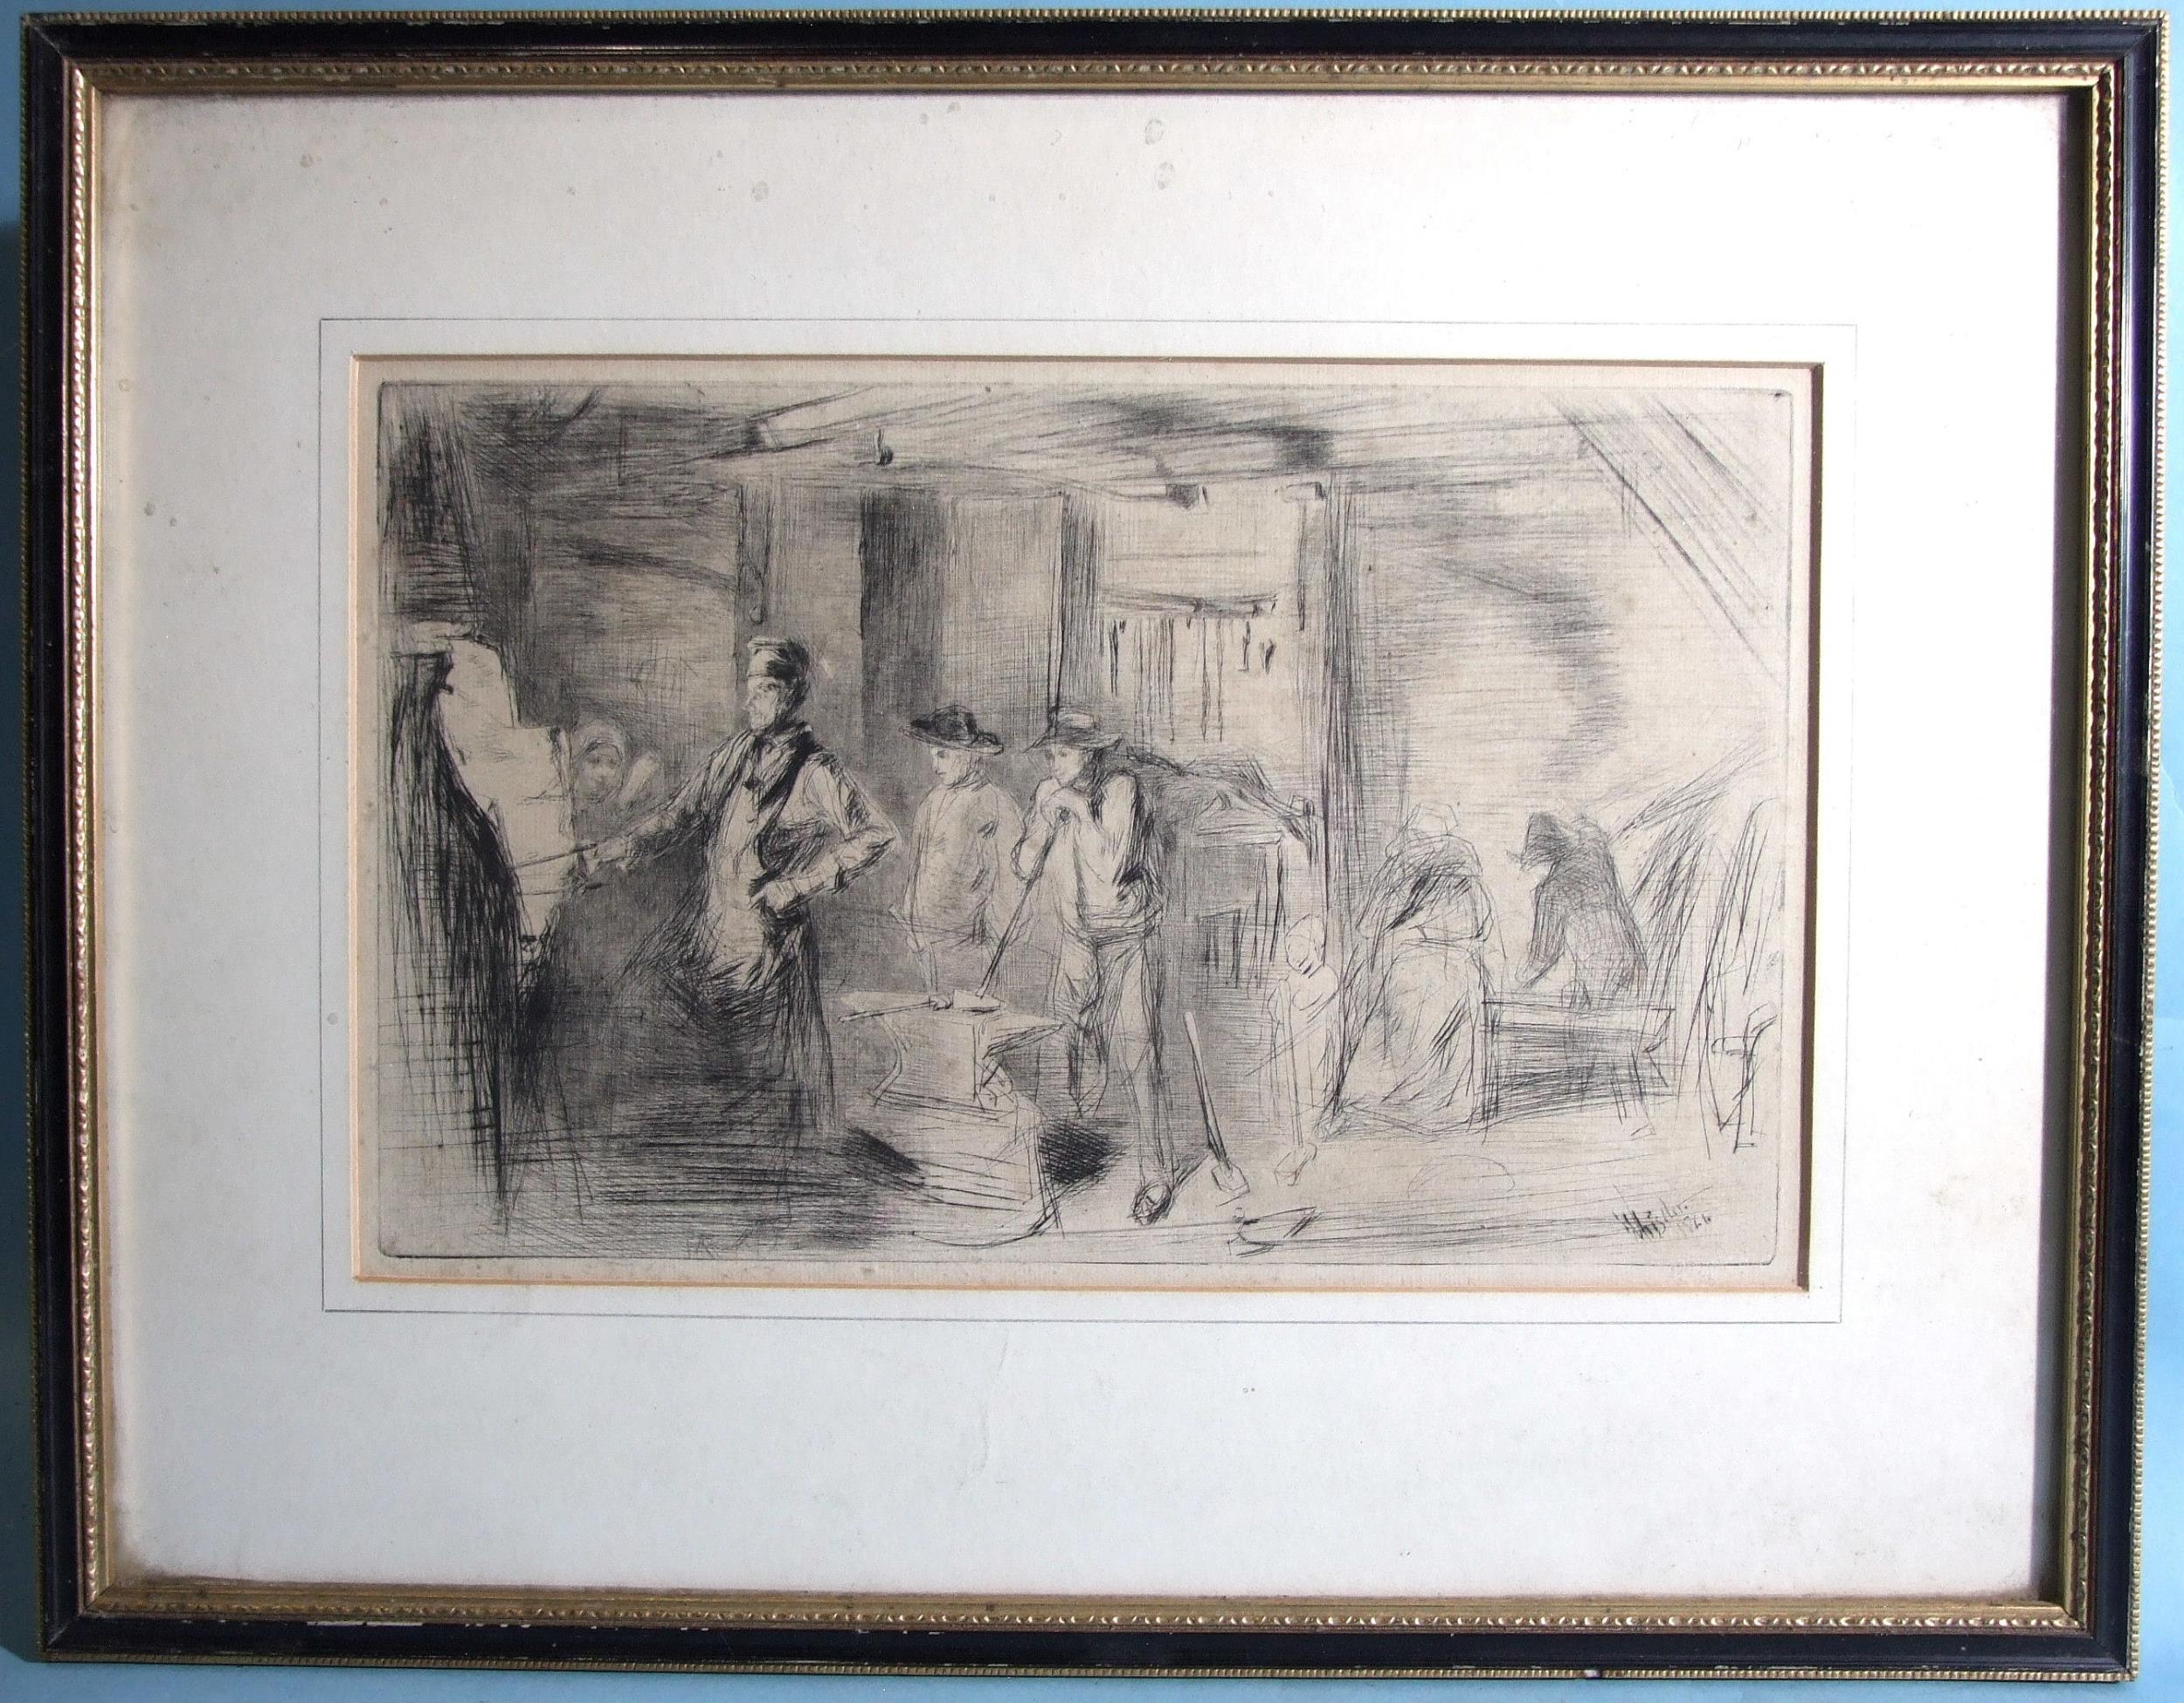 After James Abbott McNeill Whistler RBA (1834-1903), "The Forge", etching, 20 x 32.5cm.